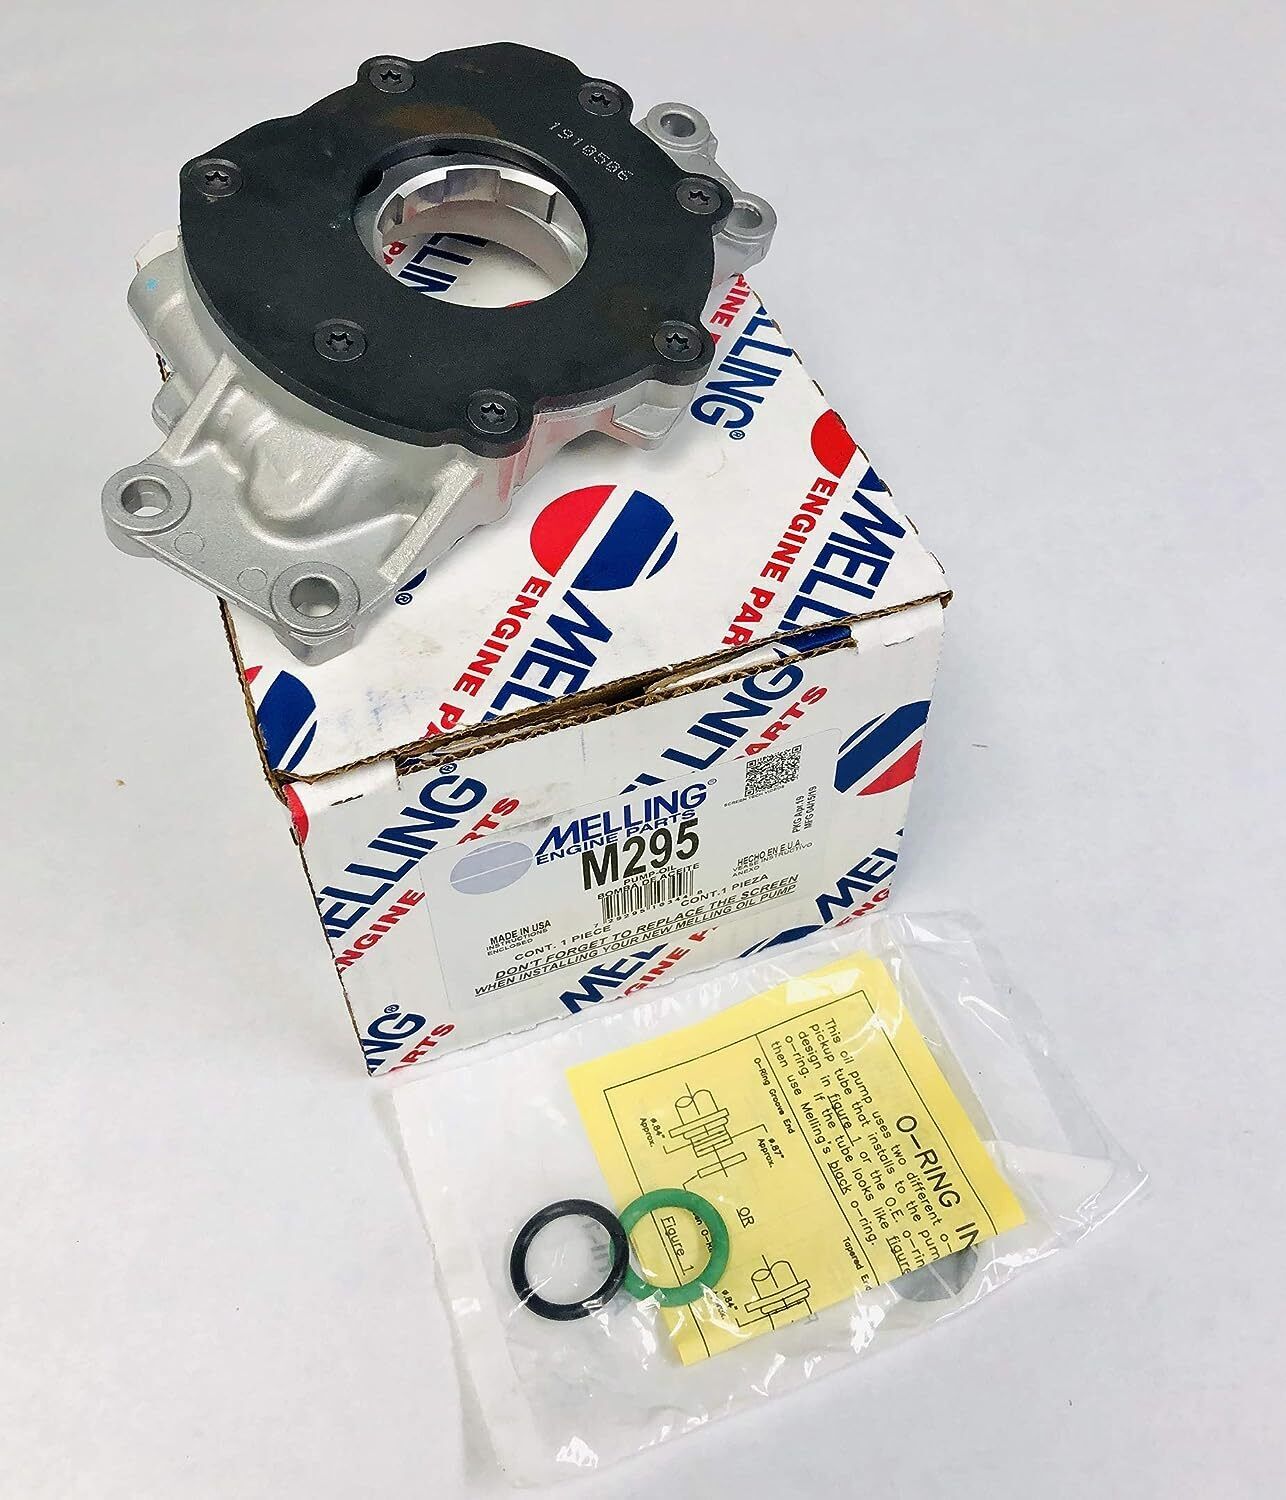 NEW Melling Stock M295 Oil Pump for Chevy 4.8 5.3 5.7 6.0 LS1 LS2 LS6 USA-MADE